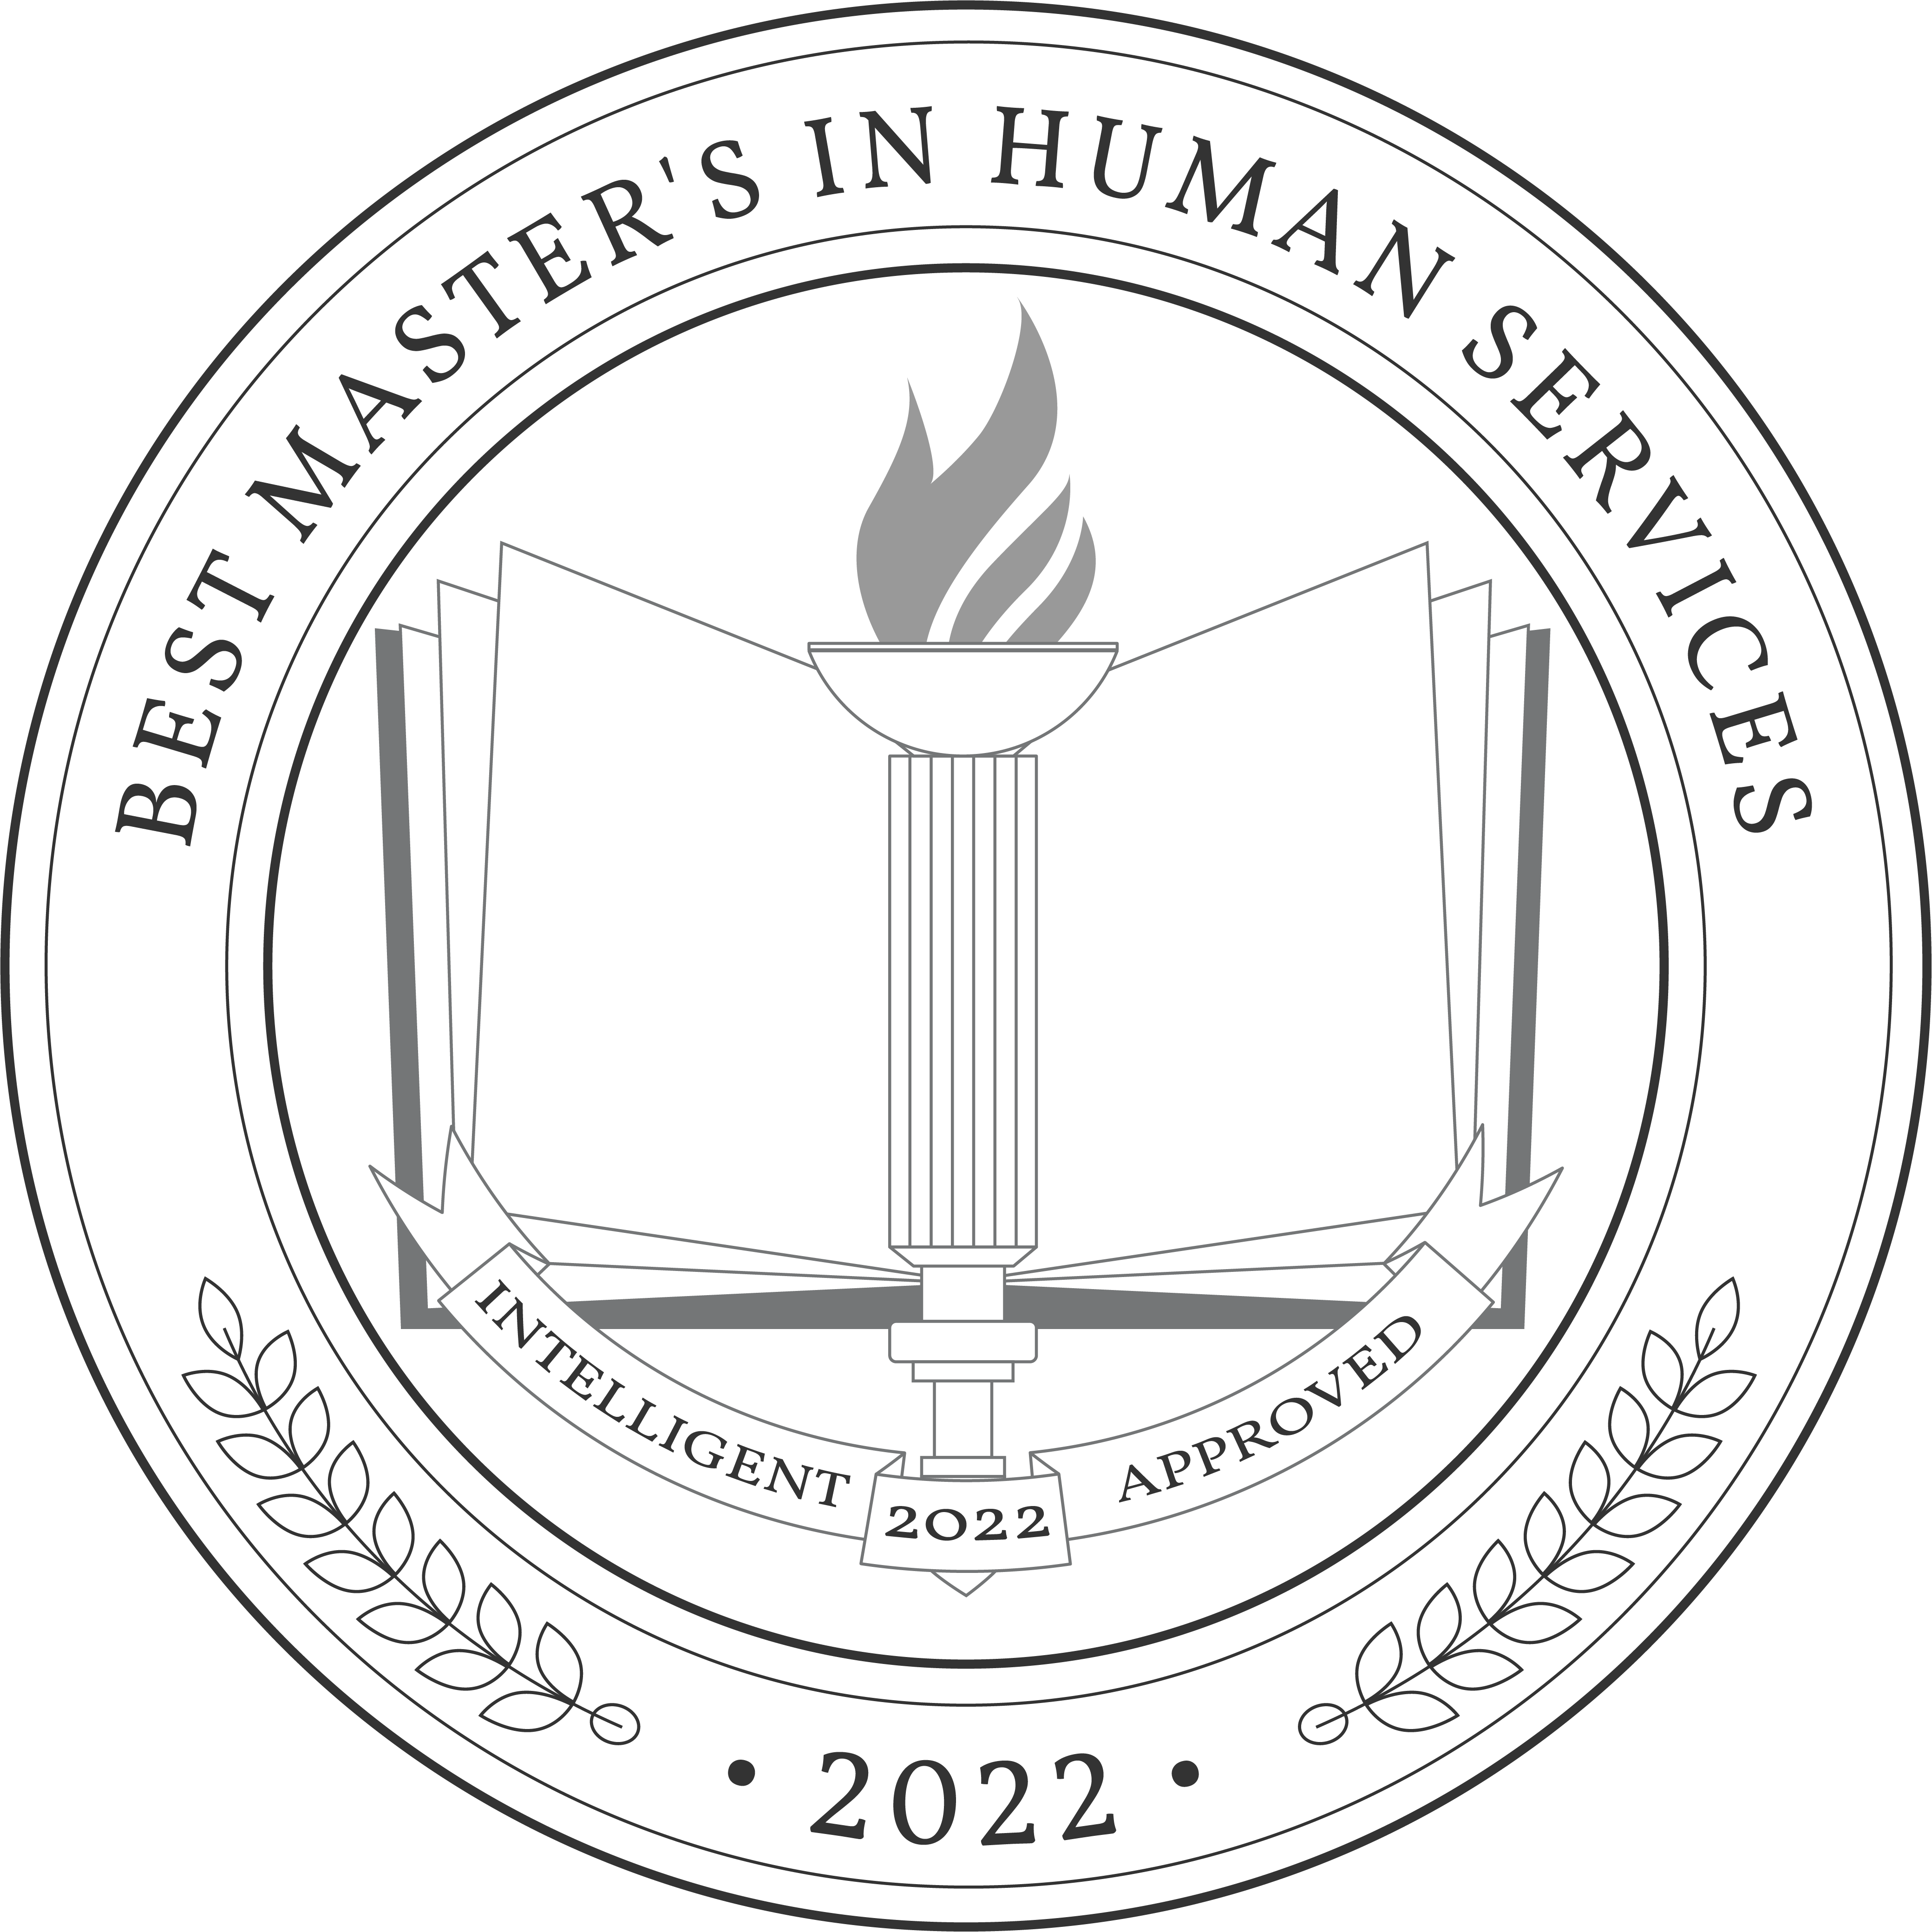 Best Master's in Human Services Degree Programs